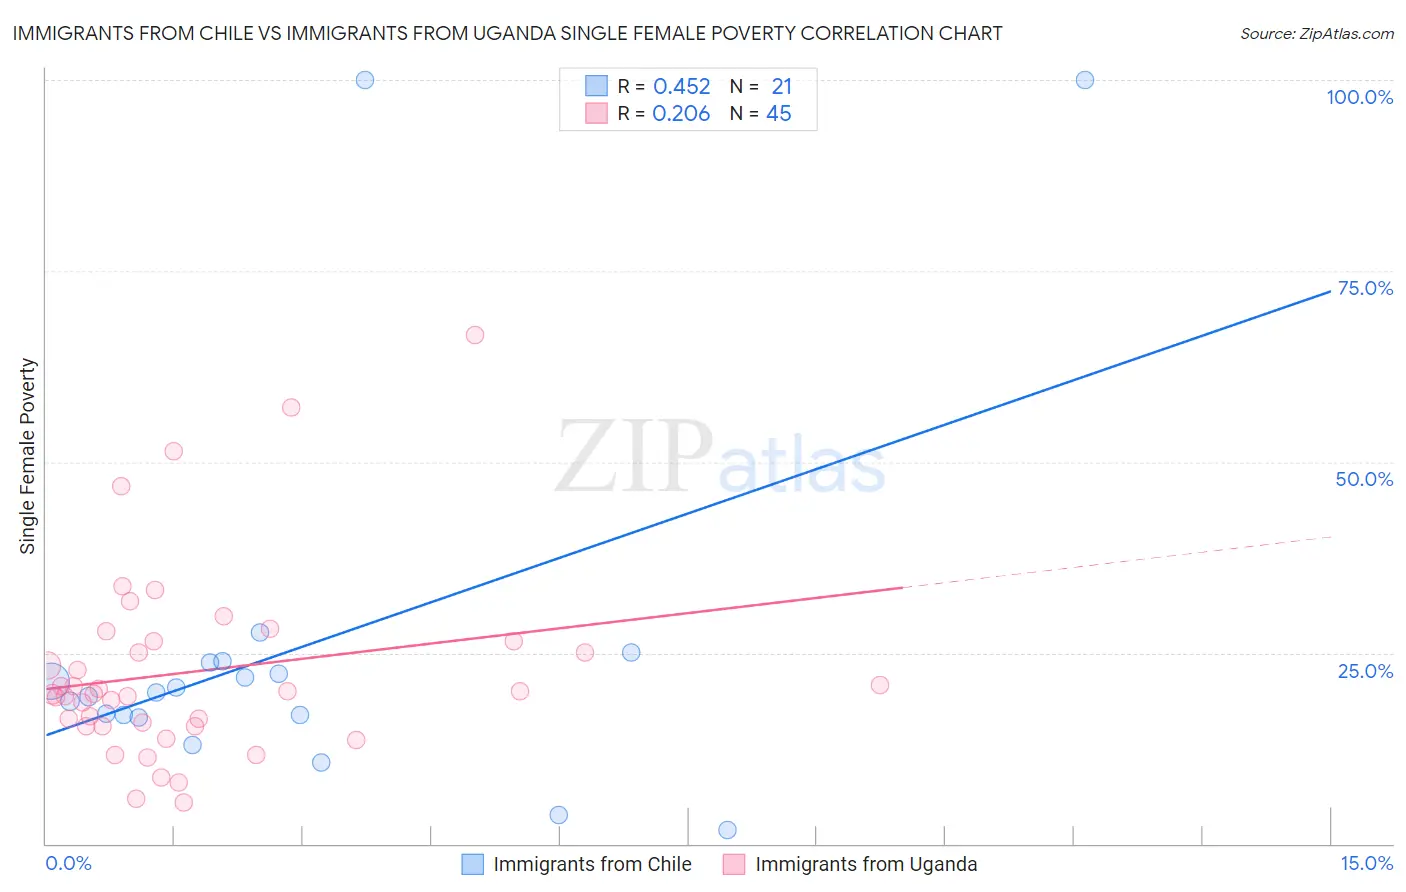 Immigrants from Chile vs Immigrants from Uganda Single Female Poverty